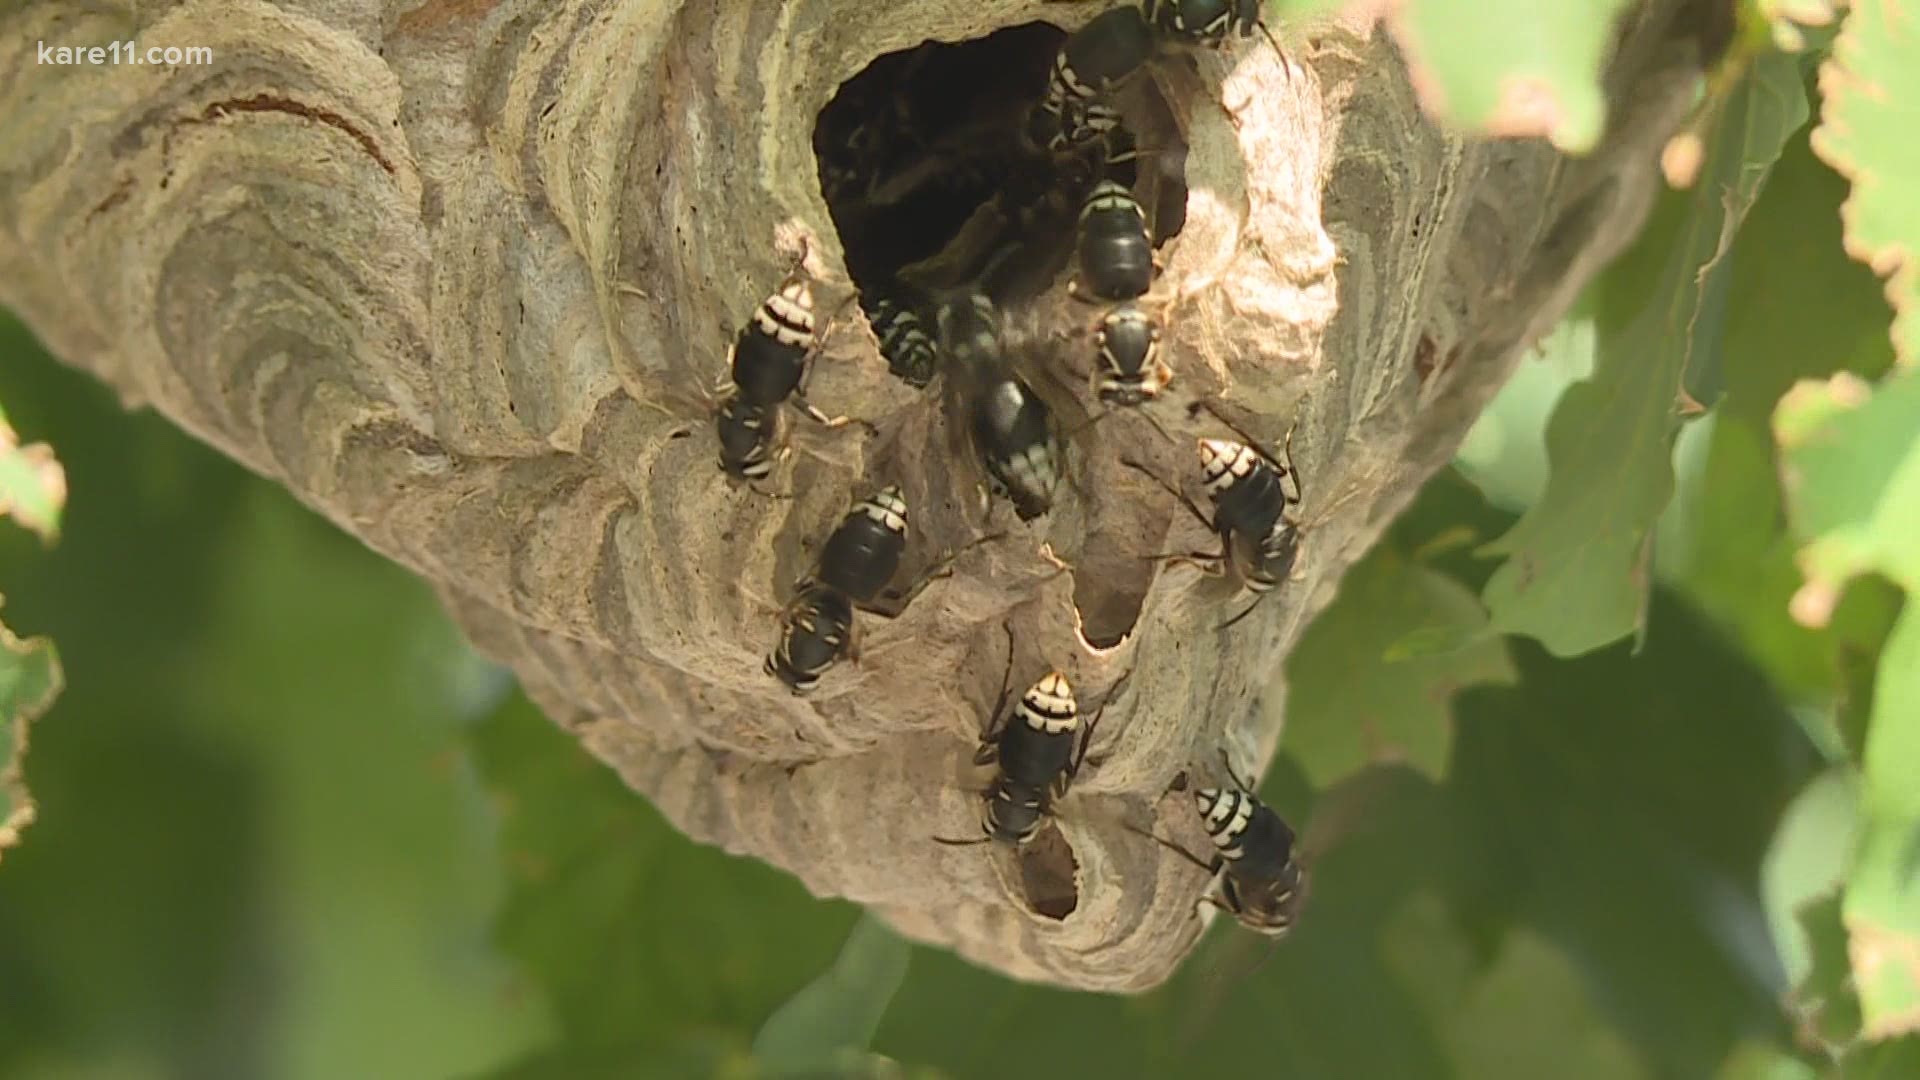 We're all about saving the bees lately, but what about wasps? They're good too!